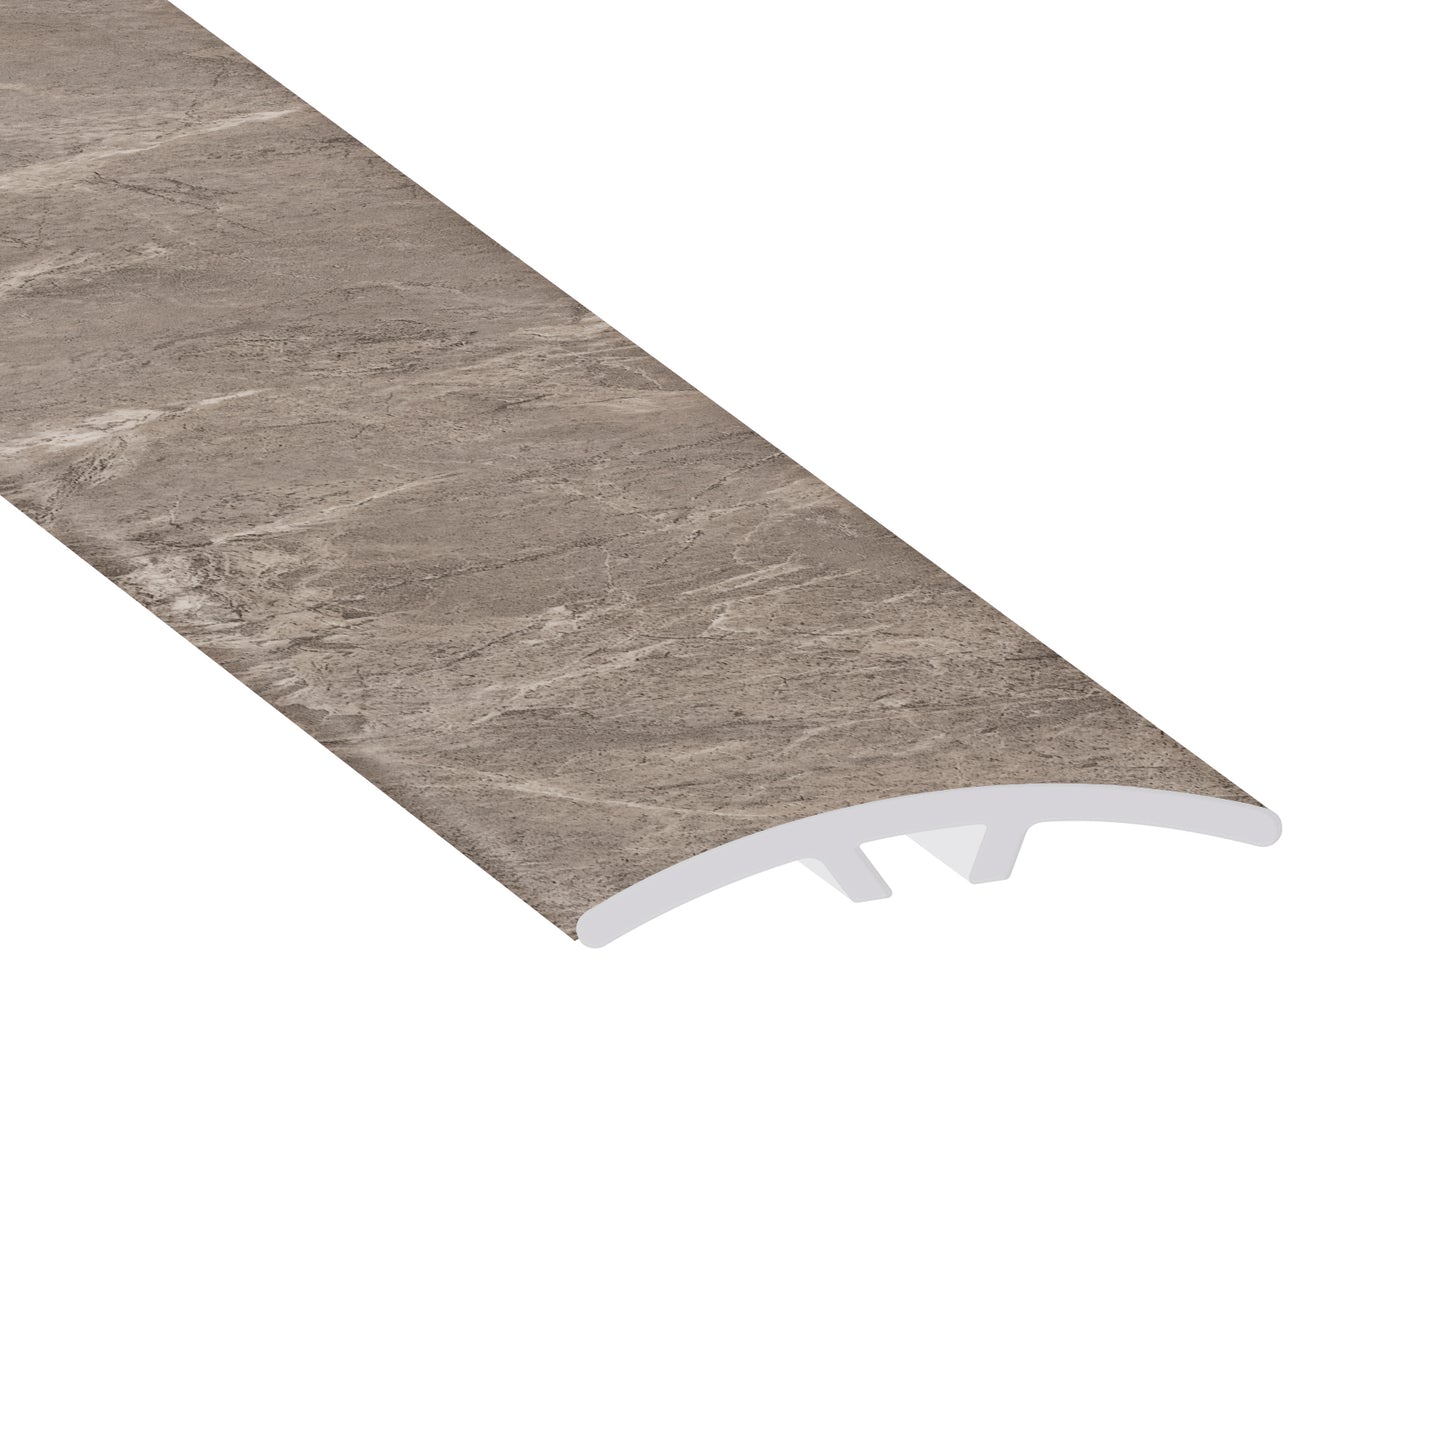 Captial Marble 0.23 in. Thich x 1.59 in. Width x 94 in. Length Multi-Purpose Reducer Vinyl Molding